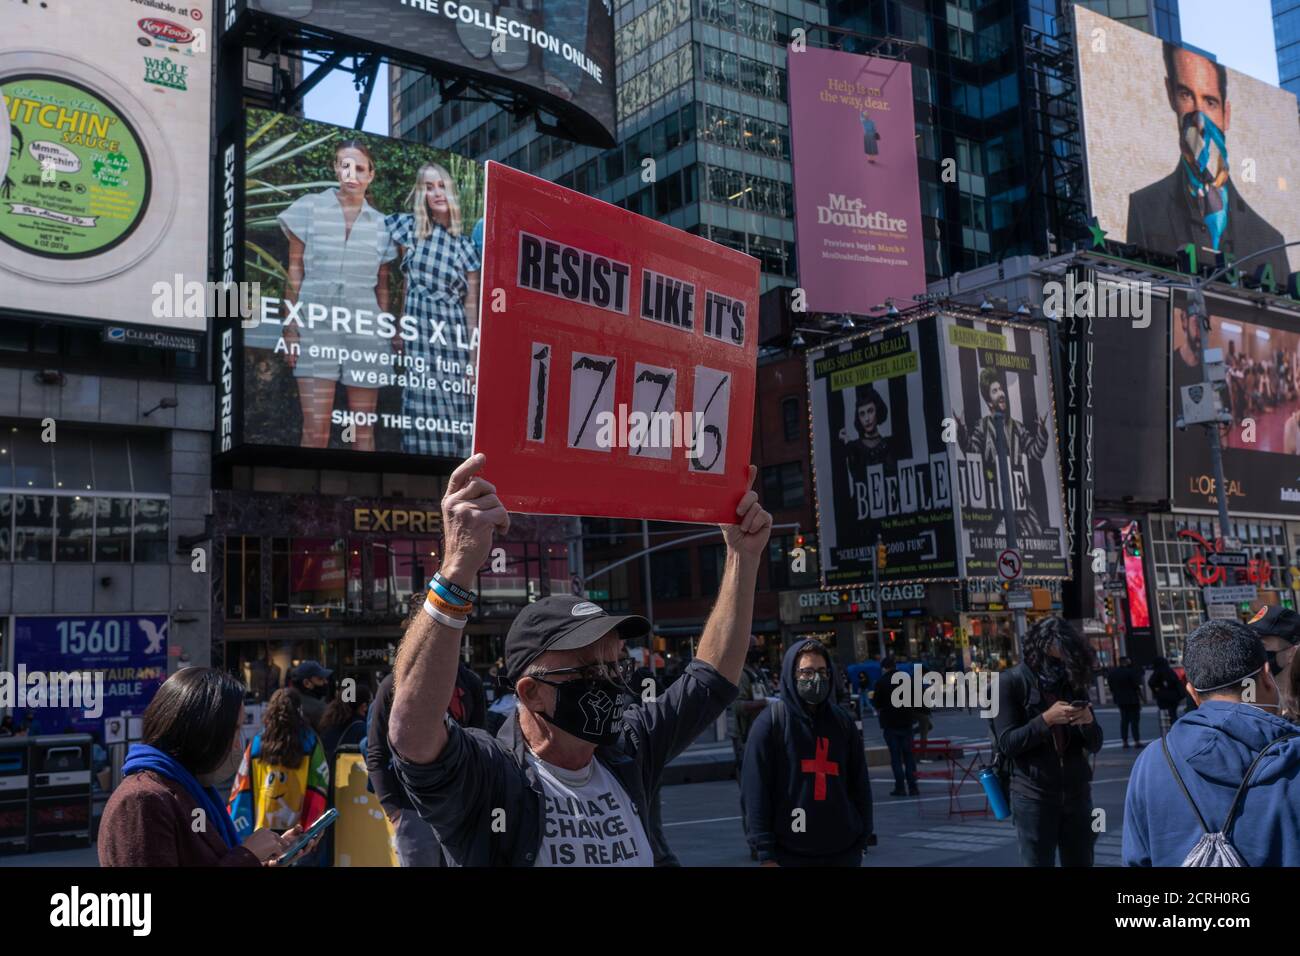 New York, United States. 19th Sep, 2020. A protester holds a placard during an Abolish ICE (Immigration and Customs Enforcement) protest at the iconic Times Square in New York City.NYPD Police officers arrest at least 50 anti-ICE protestors at the iconic Times Square. The protesters voiced their opposition to ICE during the demonstration. Credit: SOPA Images Limited/Alamy Live News Stock Photo